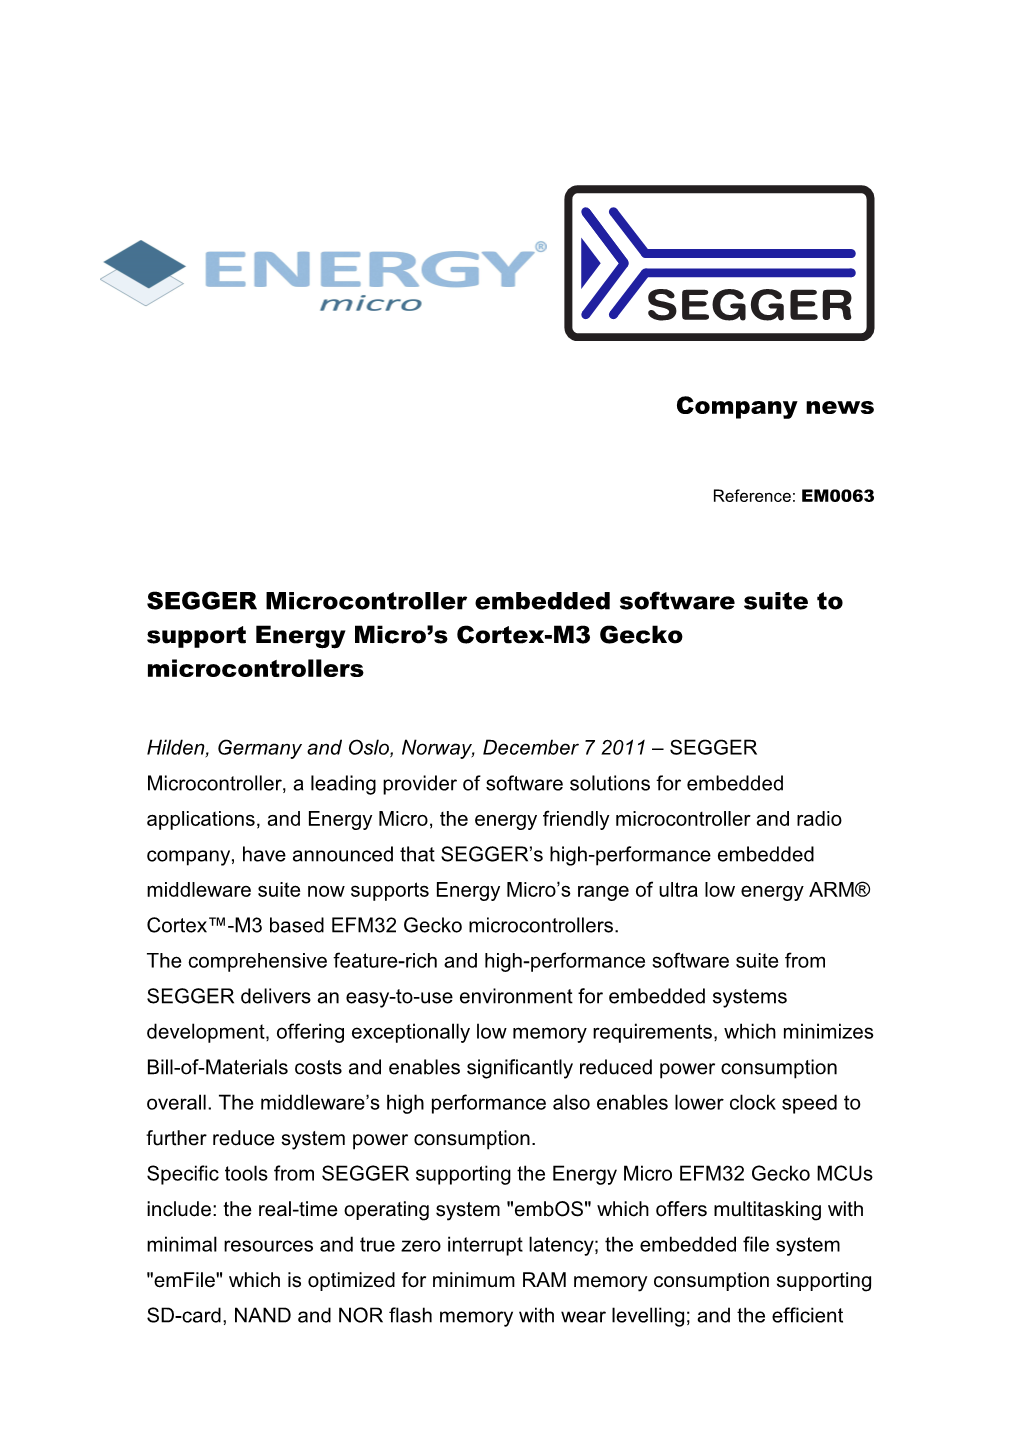 SEGGER Microcontroller Embedded Software Suite to Support Energy Micro’S Cortex-M3 Gecko Microcontrollers